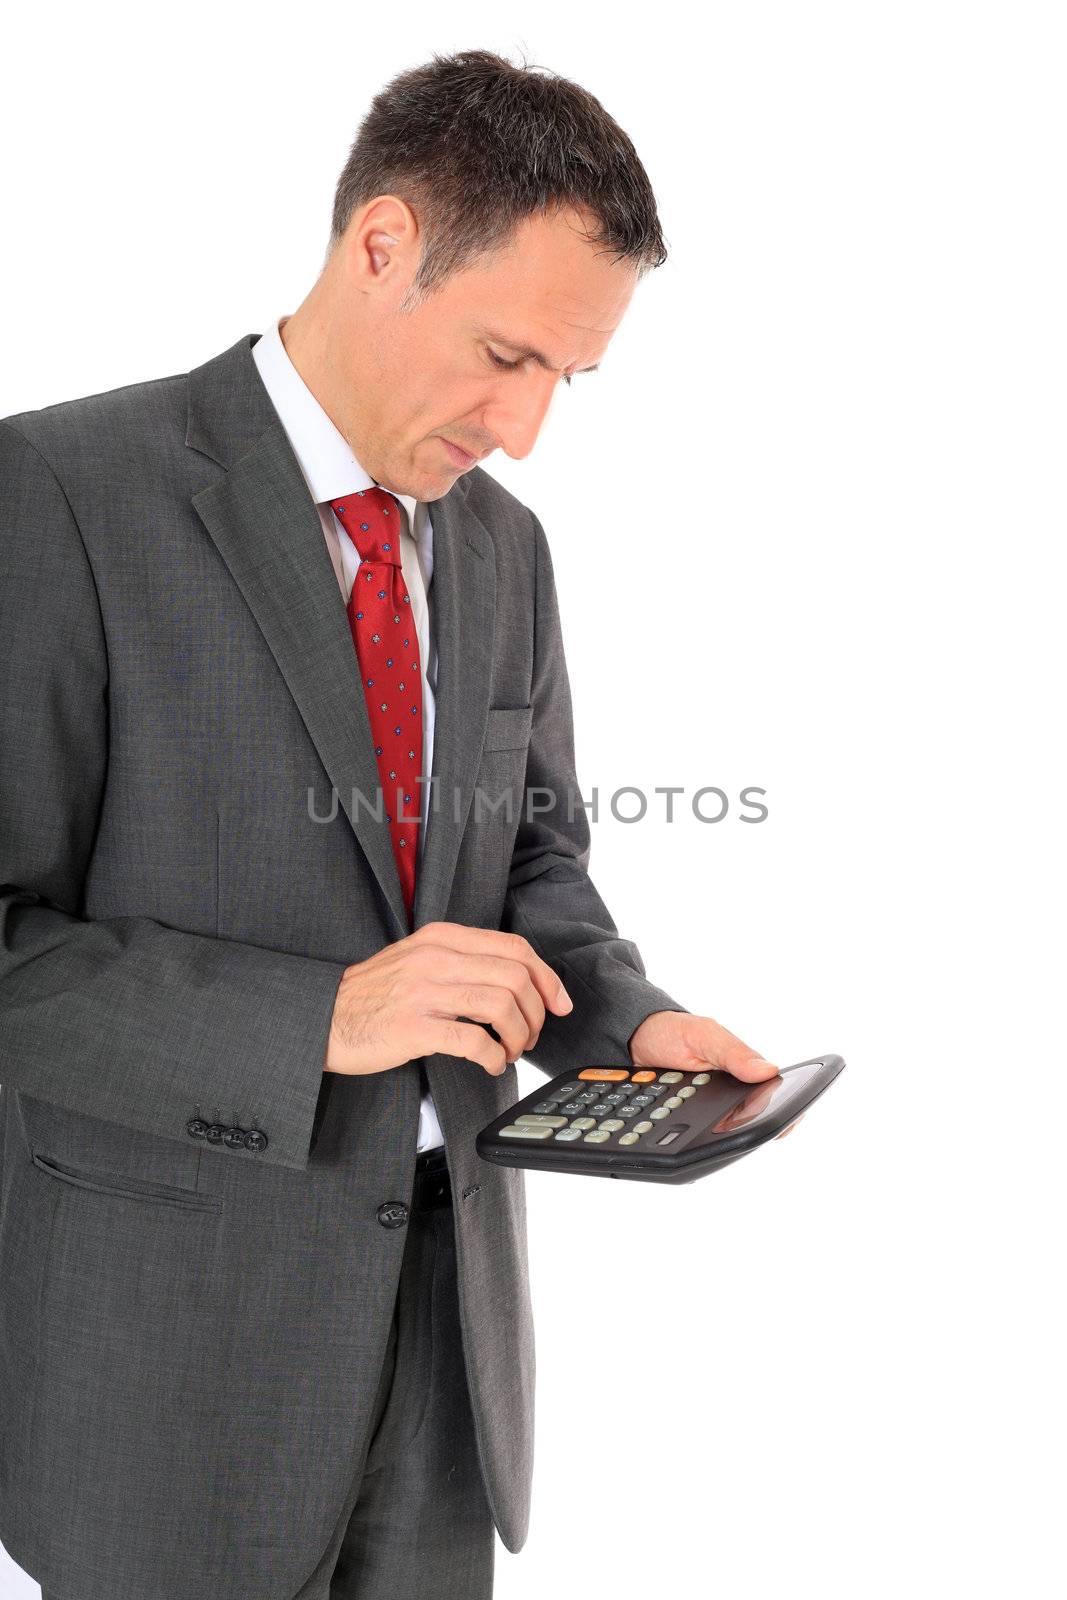 Attractive businessman using calculator. All on white background.